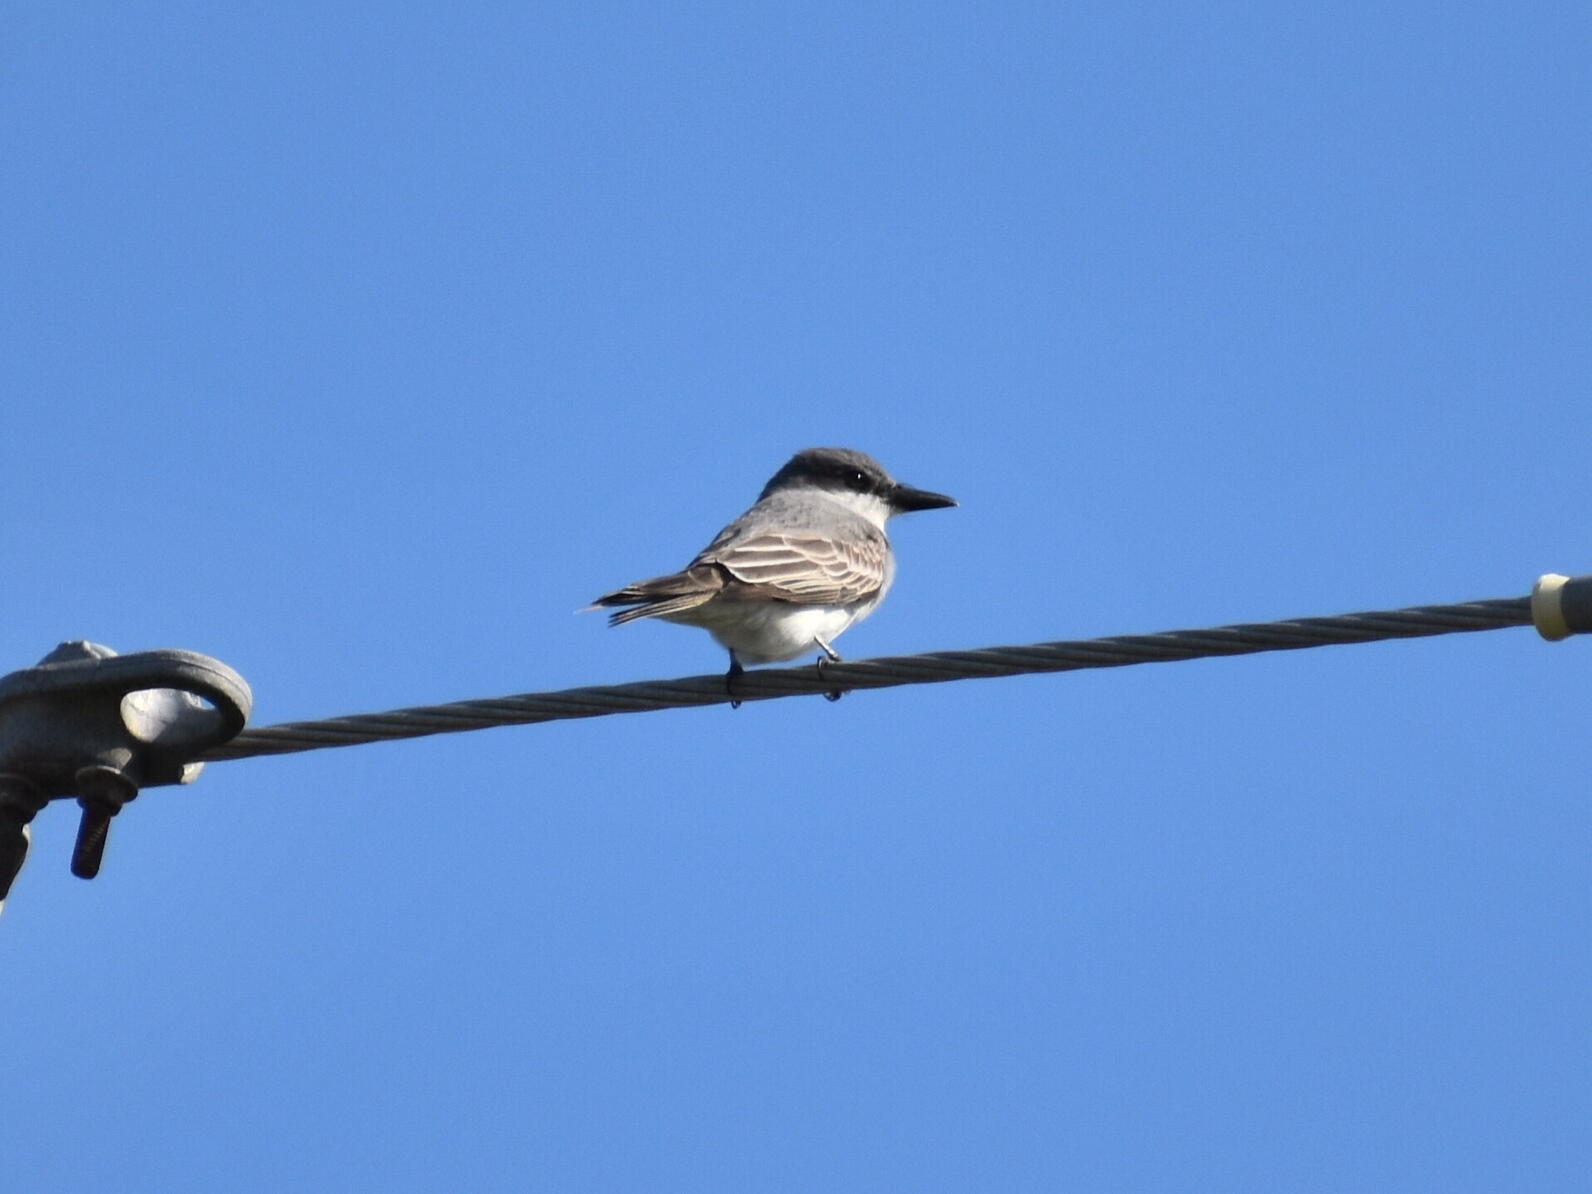 An Eastern Kingbird sits on a powerline and looks to the right.